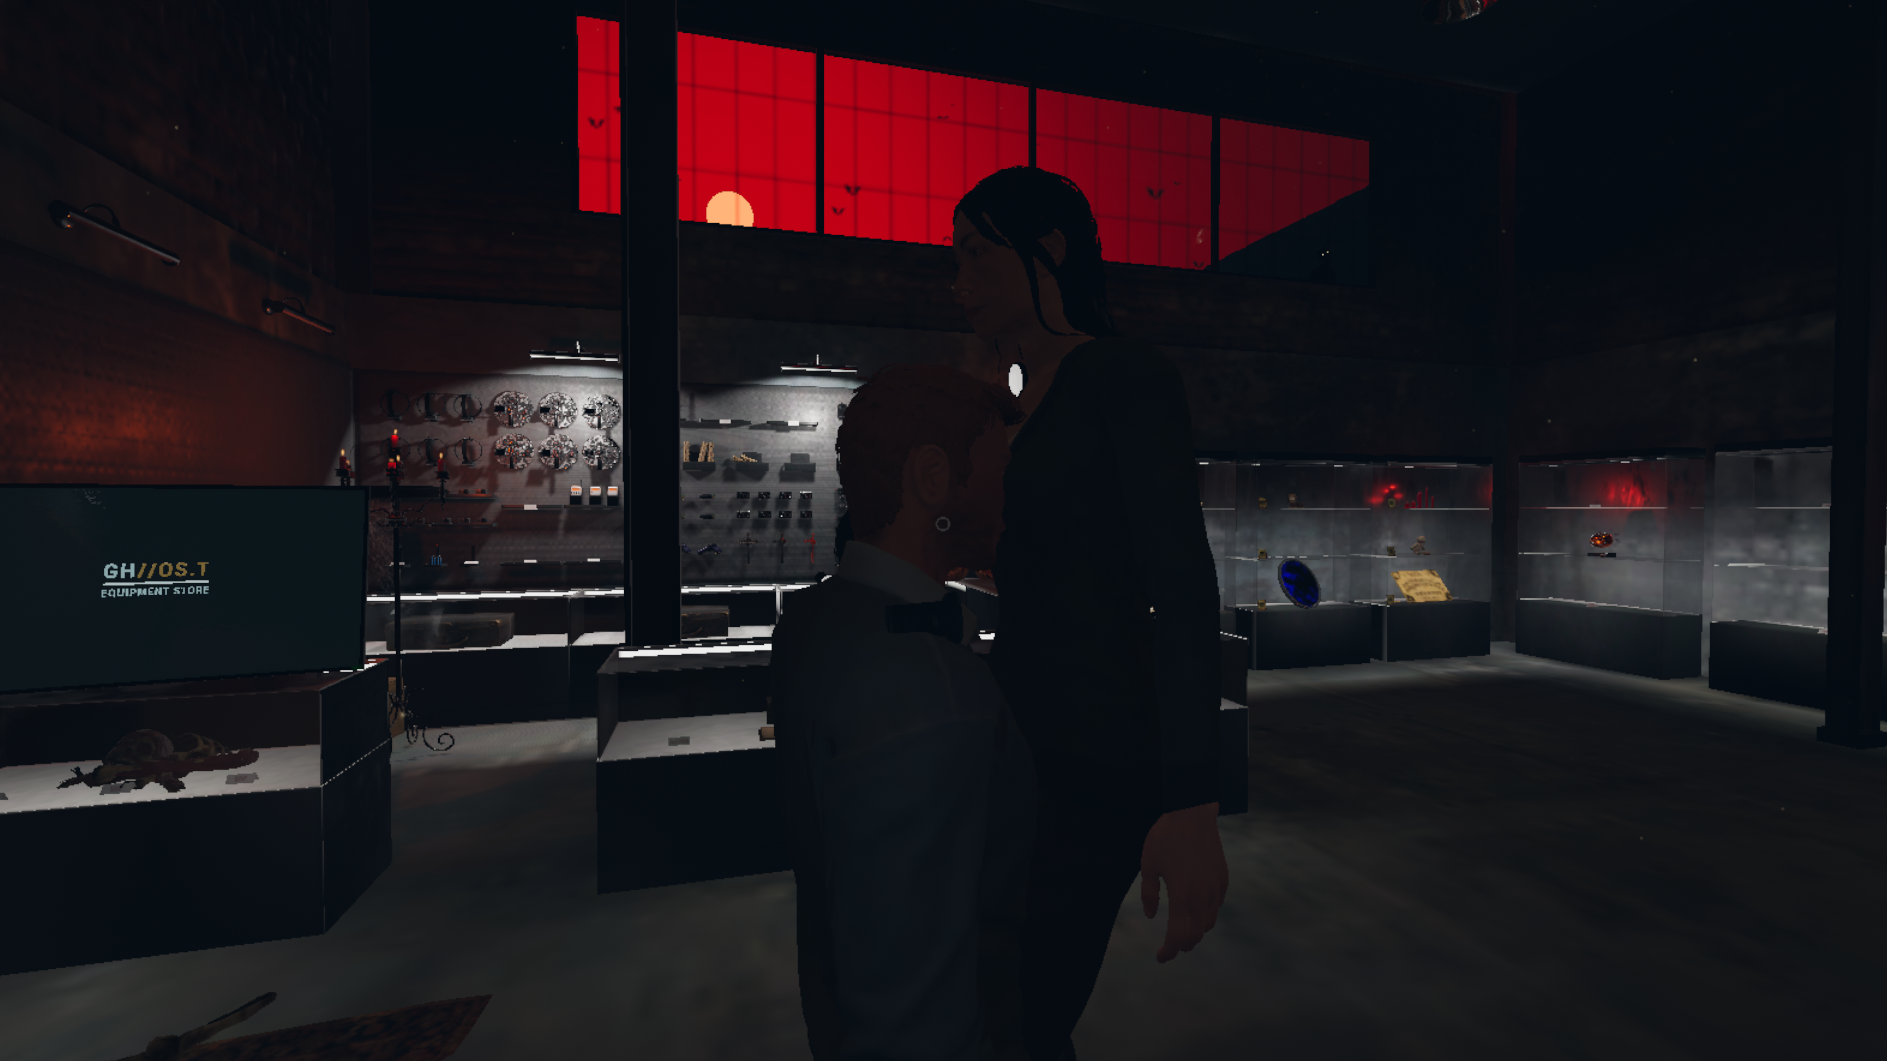 A player's face clipping through another player's boobs